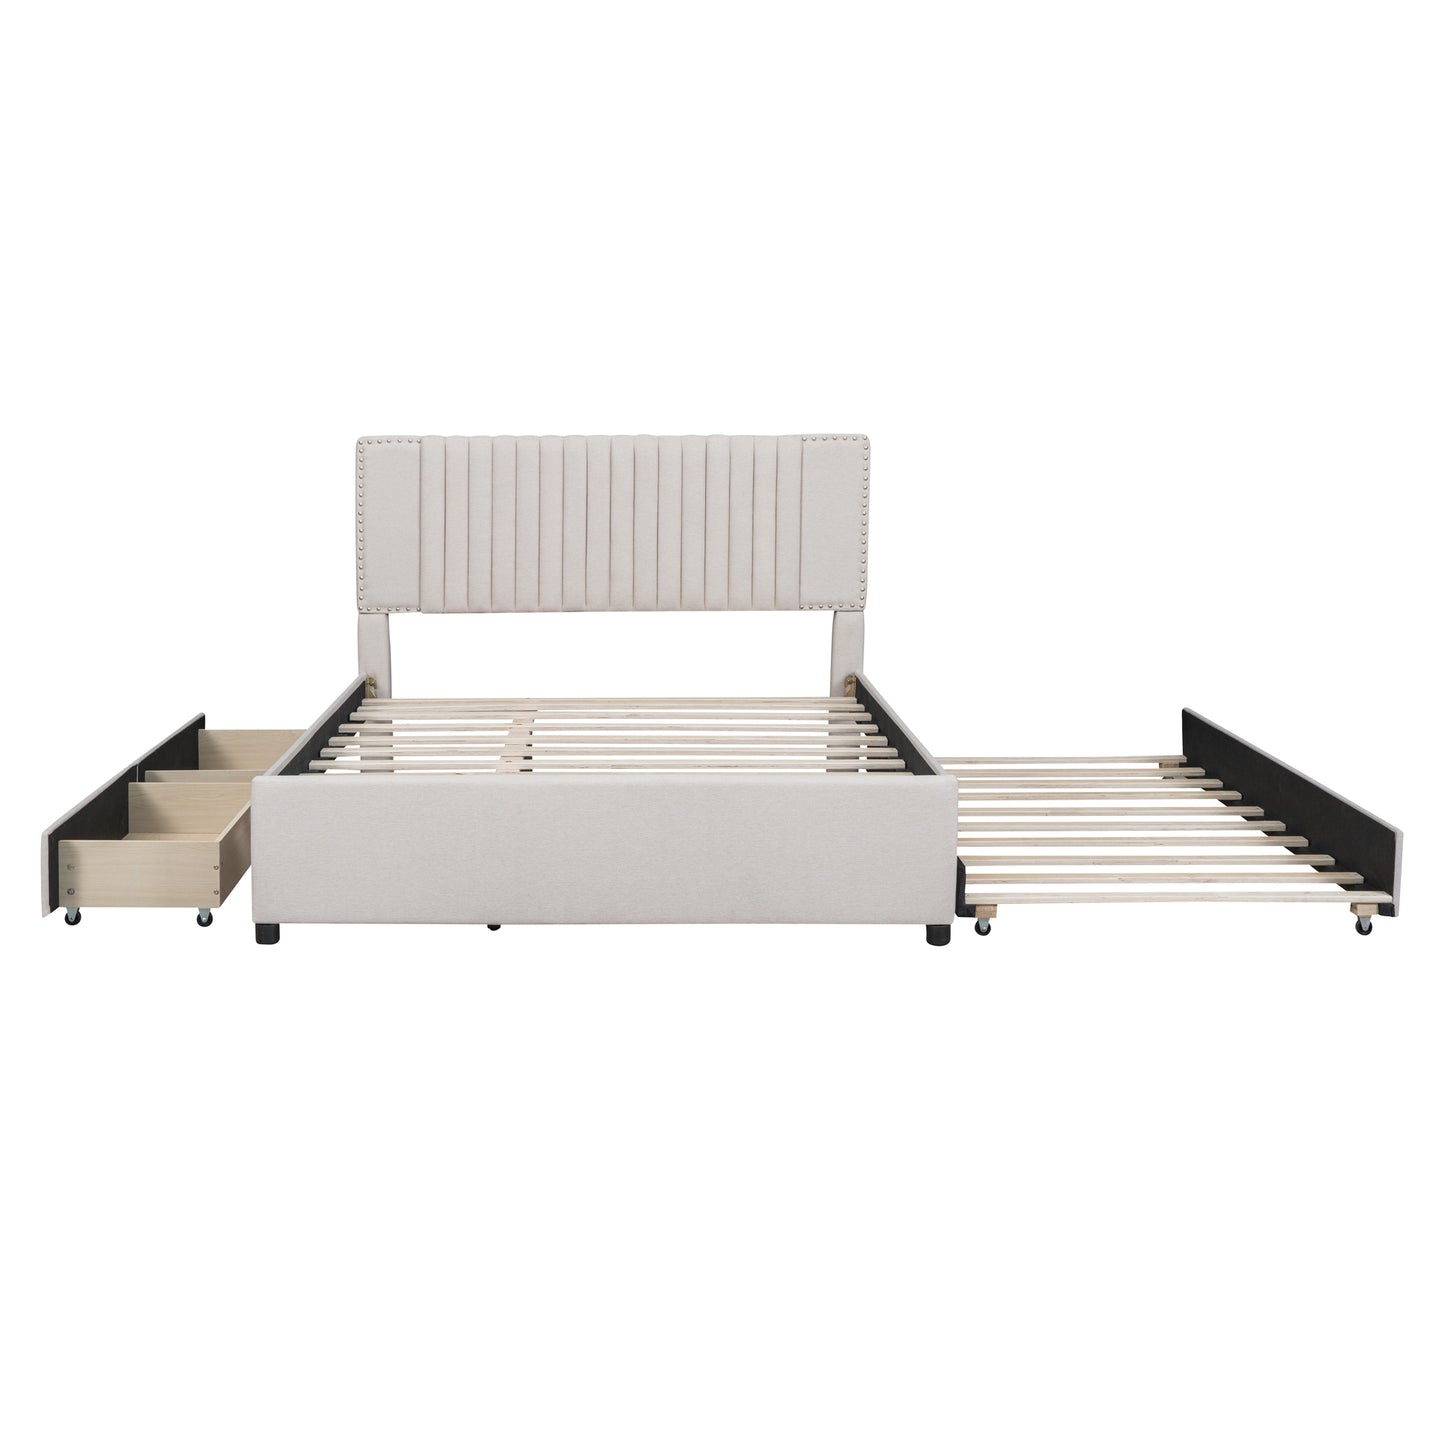 Queen Size Upholstered Platform Bed with 2 Drawers and 1 Twin XL Trundle, Classic Headboard Design, Beige